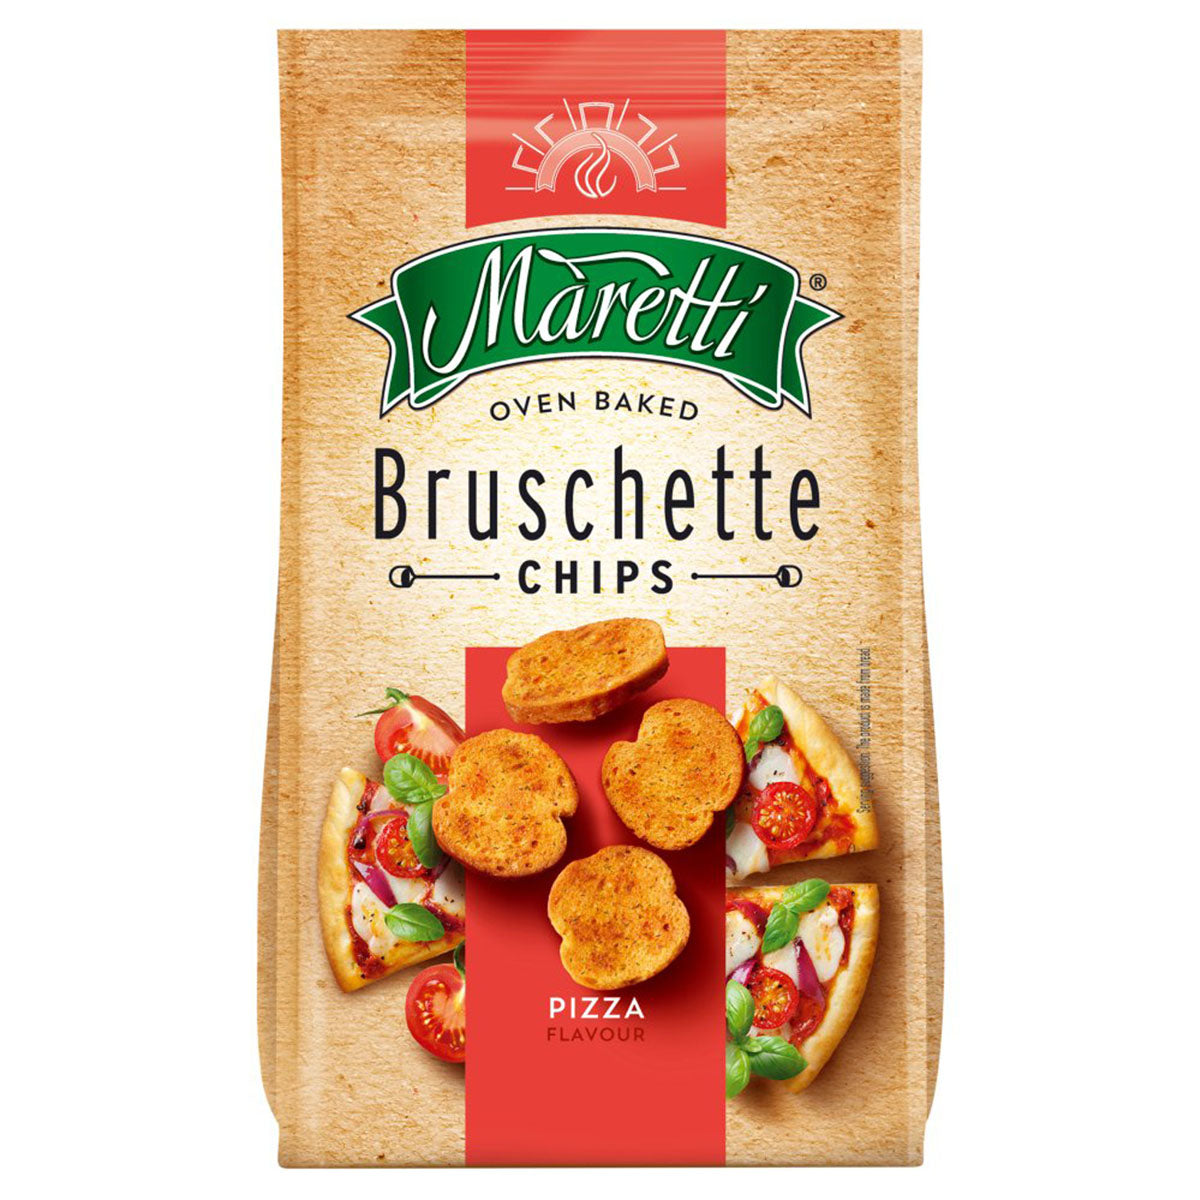 Maretti - Oven Baked Bruschette Chips Pizza Flavour - 70g - Continental Food Store